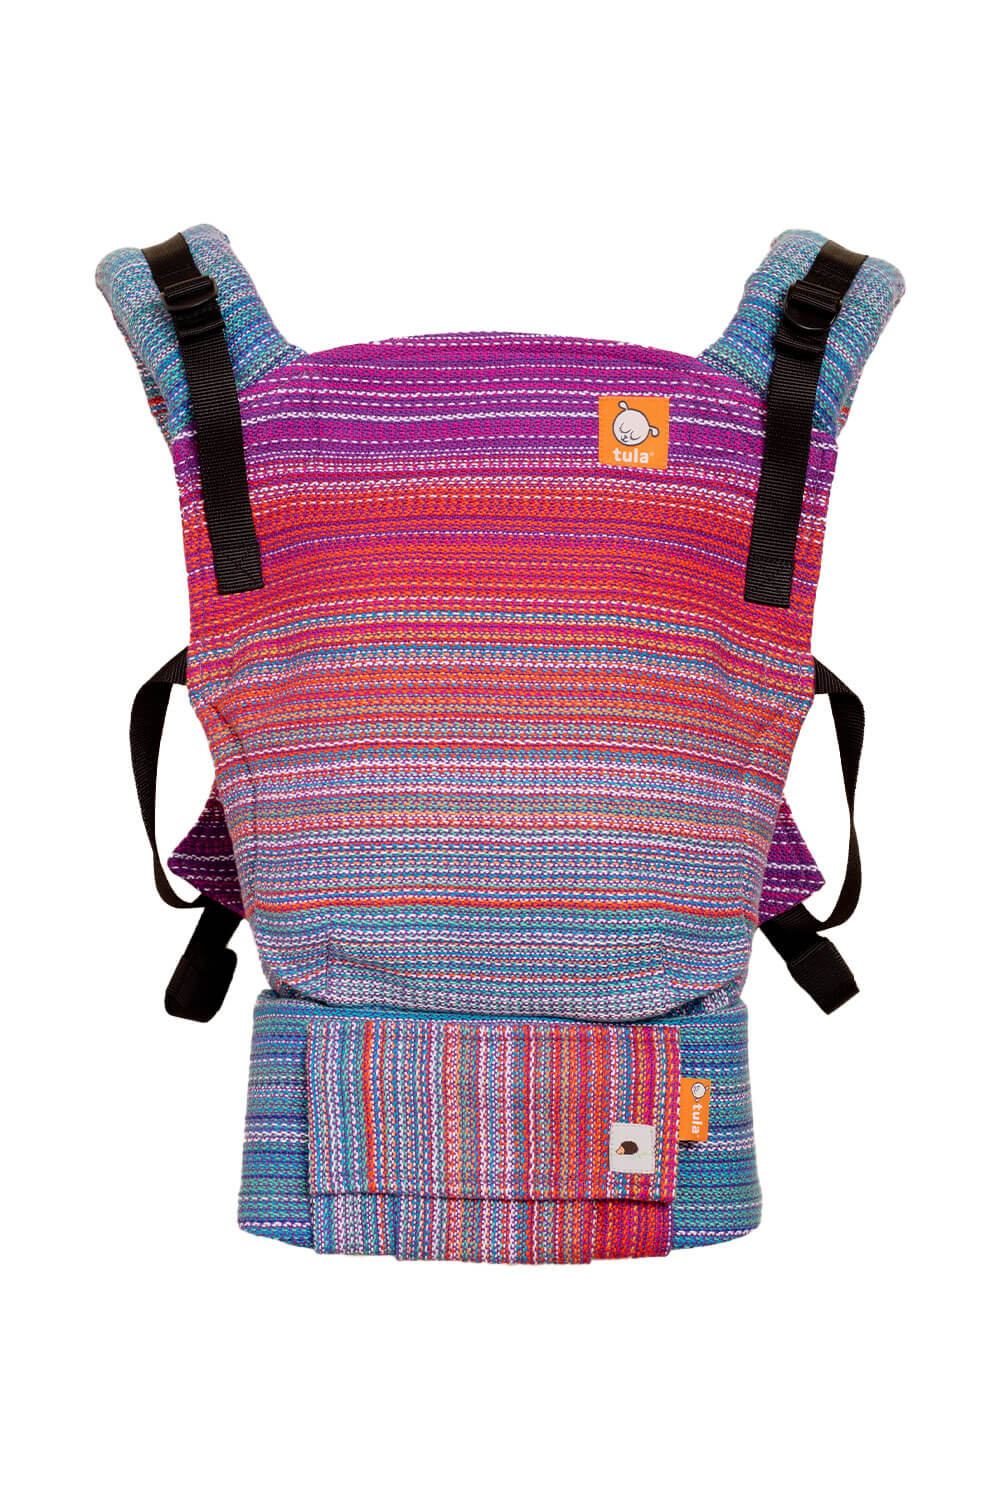 Glow Mauve - Signature Handwoven Free-to-Grow Baby Carrier